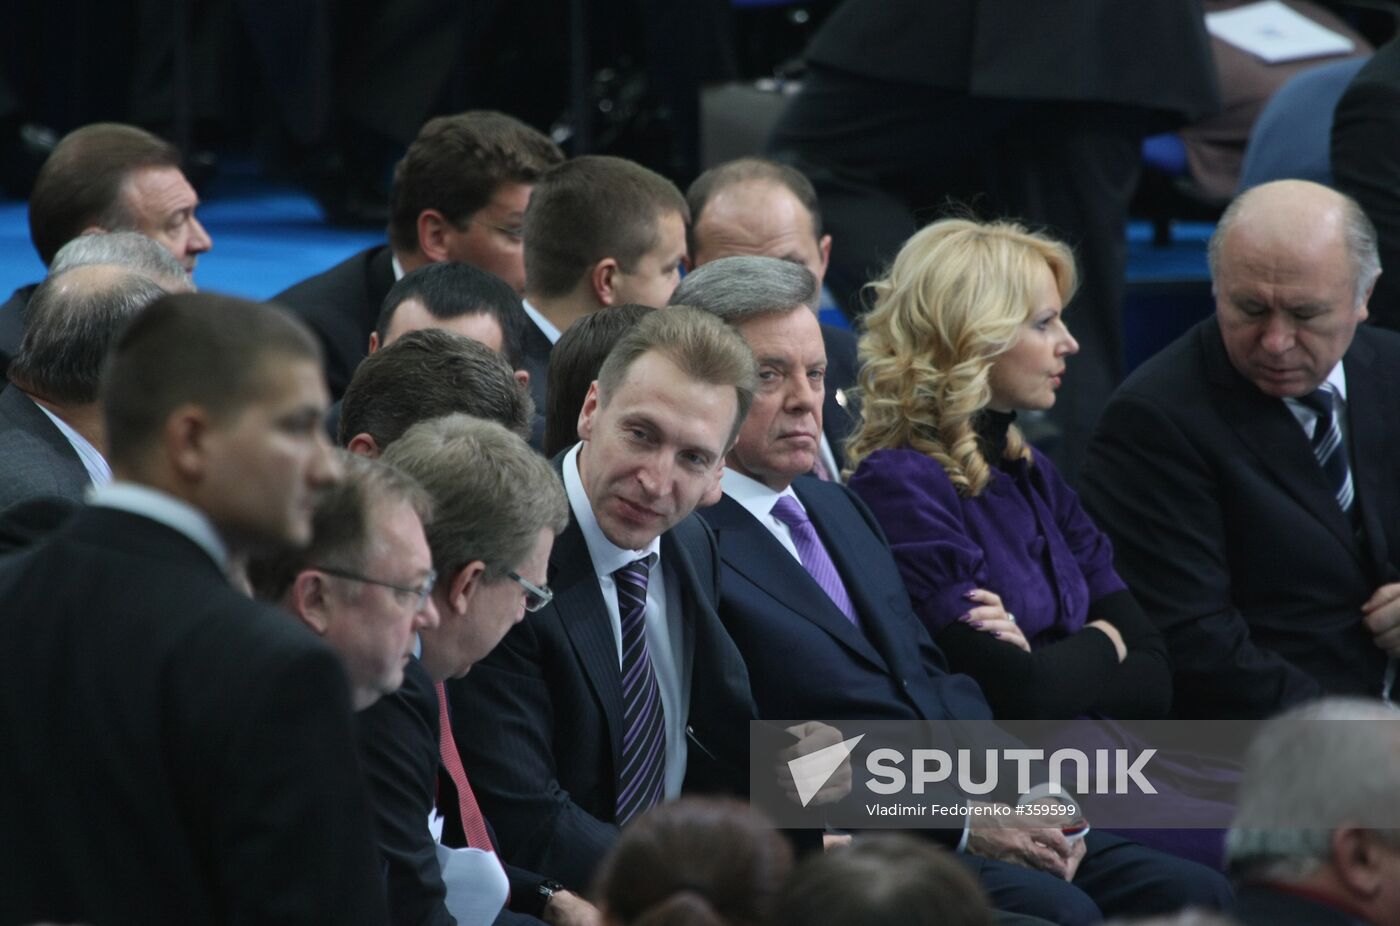 United Russia's 10th congress opens in Moscow